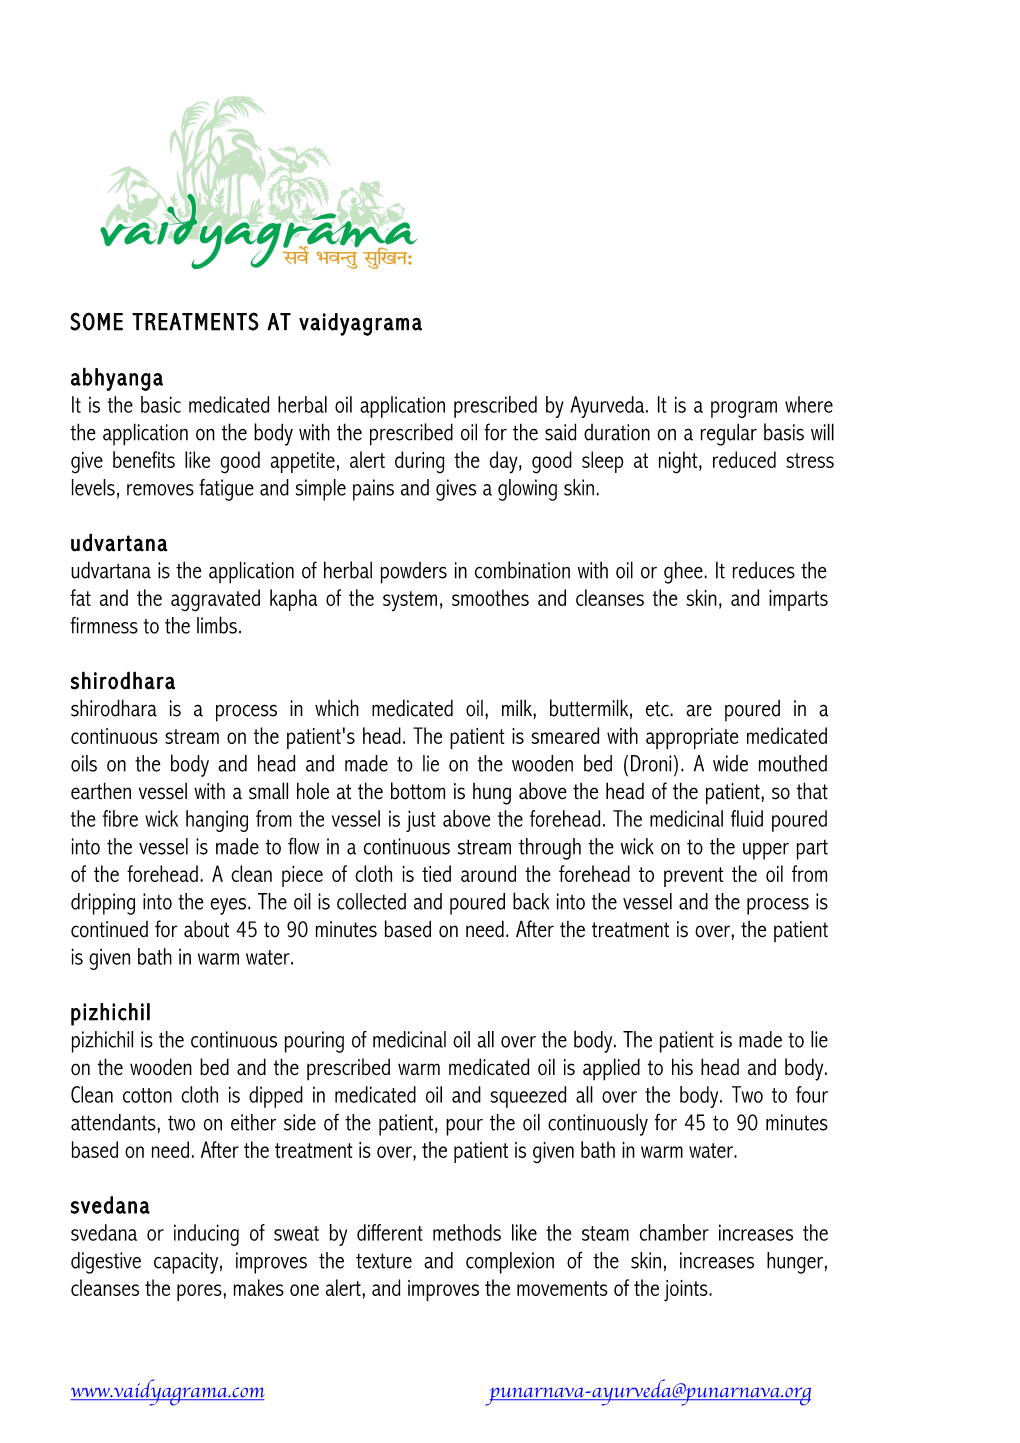 SOME TREATMENTS at Vaidyagrama Abhyanga It Is the Basic Medicated Herbal Oil Application Prescribed by Ayurveda